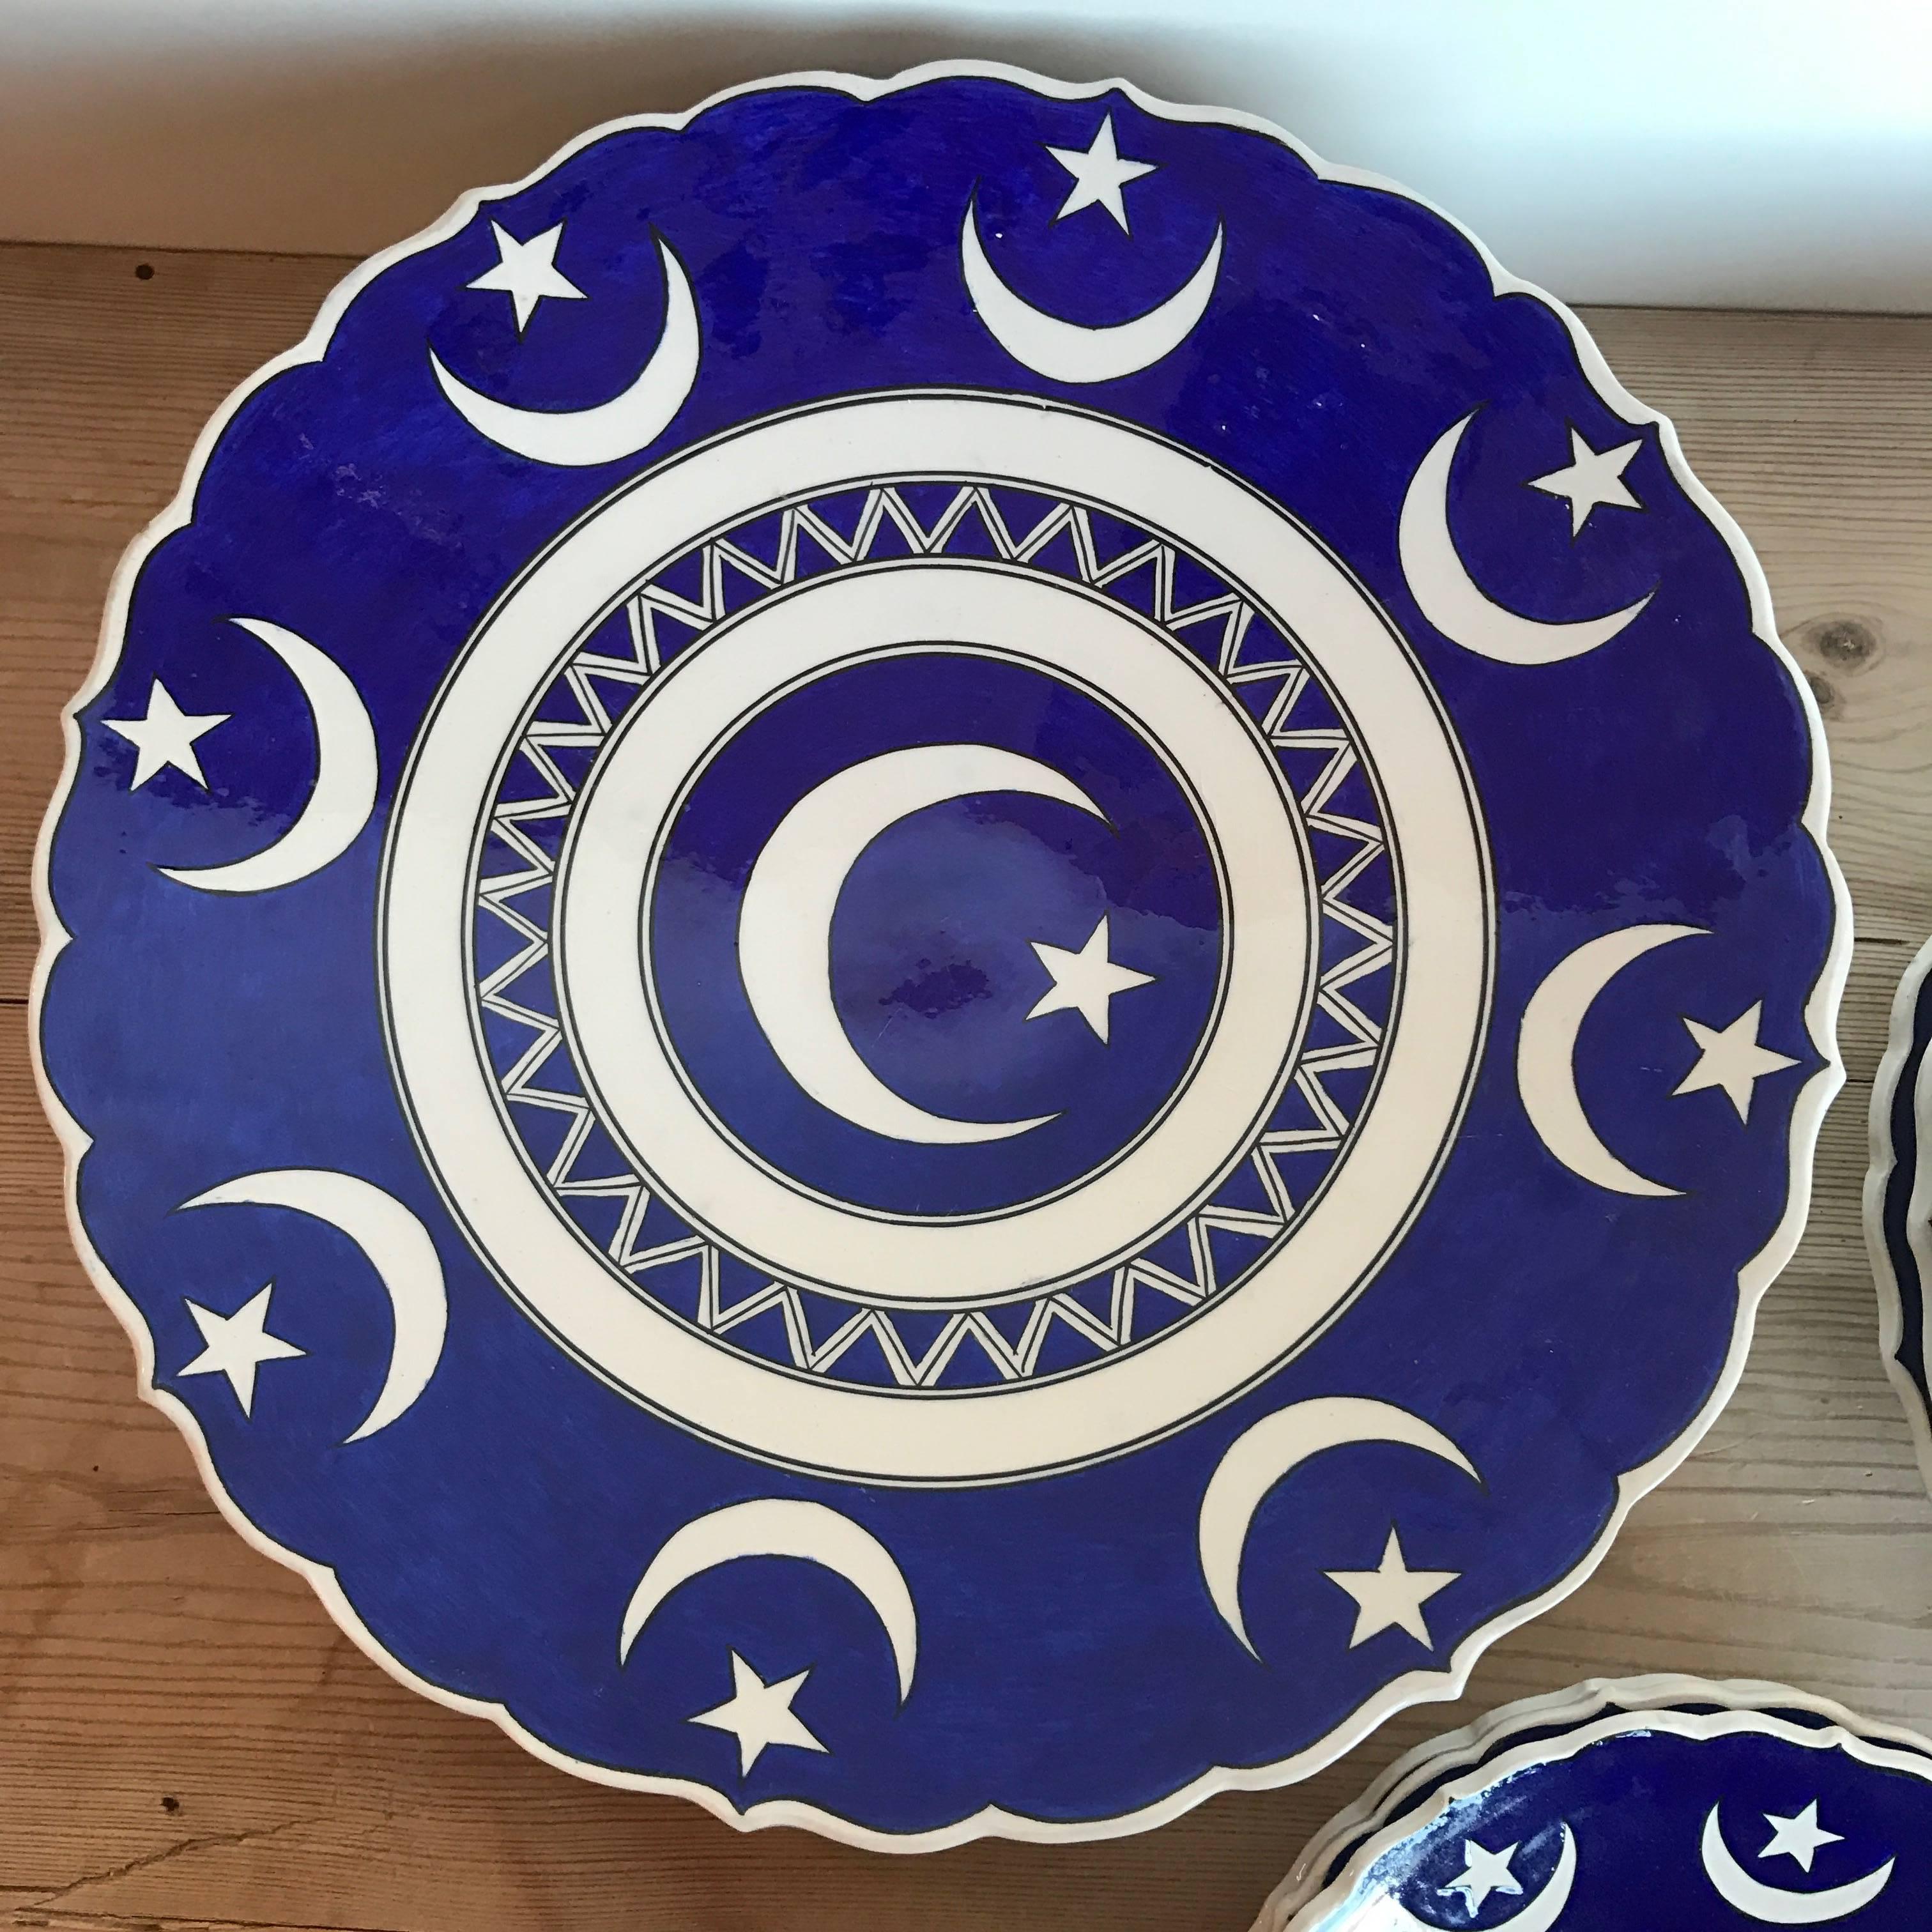 Set of 12 hand-painted Turkish plates
Four 12” diameter
Four 10” diameter
Four 7” diameter